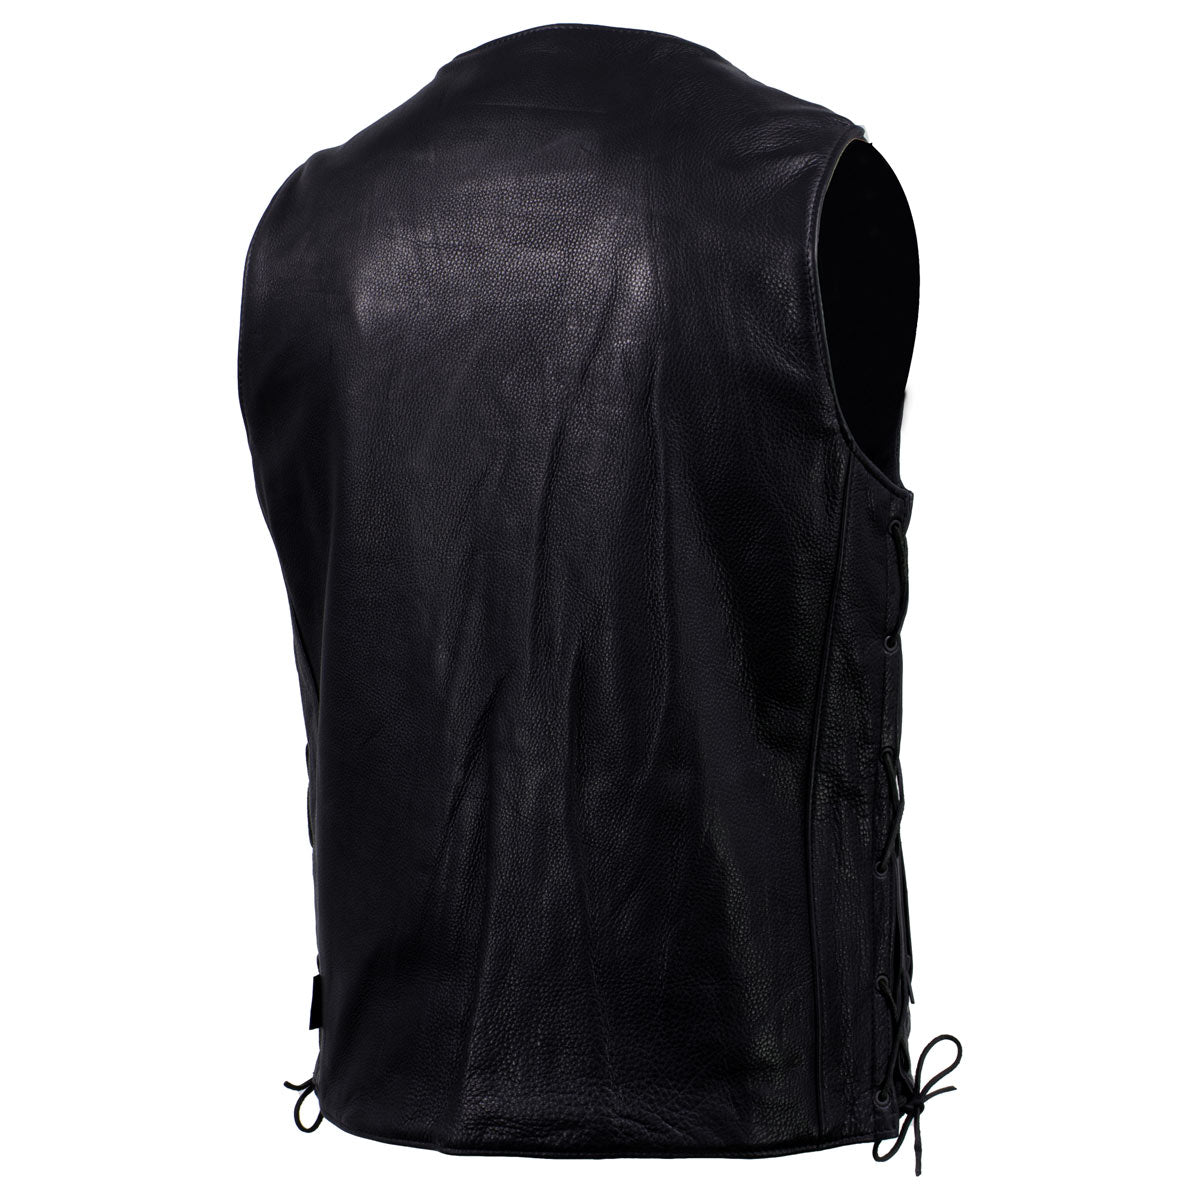 Milwaukee Leather USA MADE MLVSM5005 Men's Black 'Road Whip' Premium Motorcycle Leather Vest with Buffalo Snap Buttons